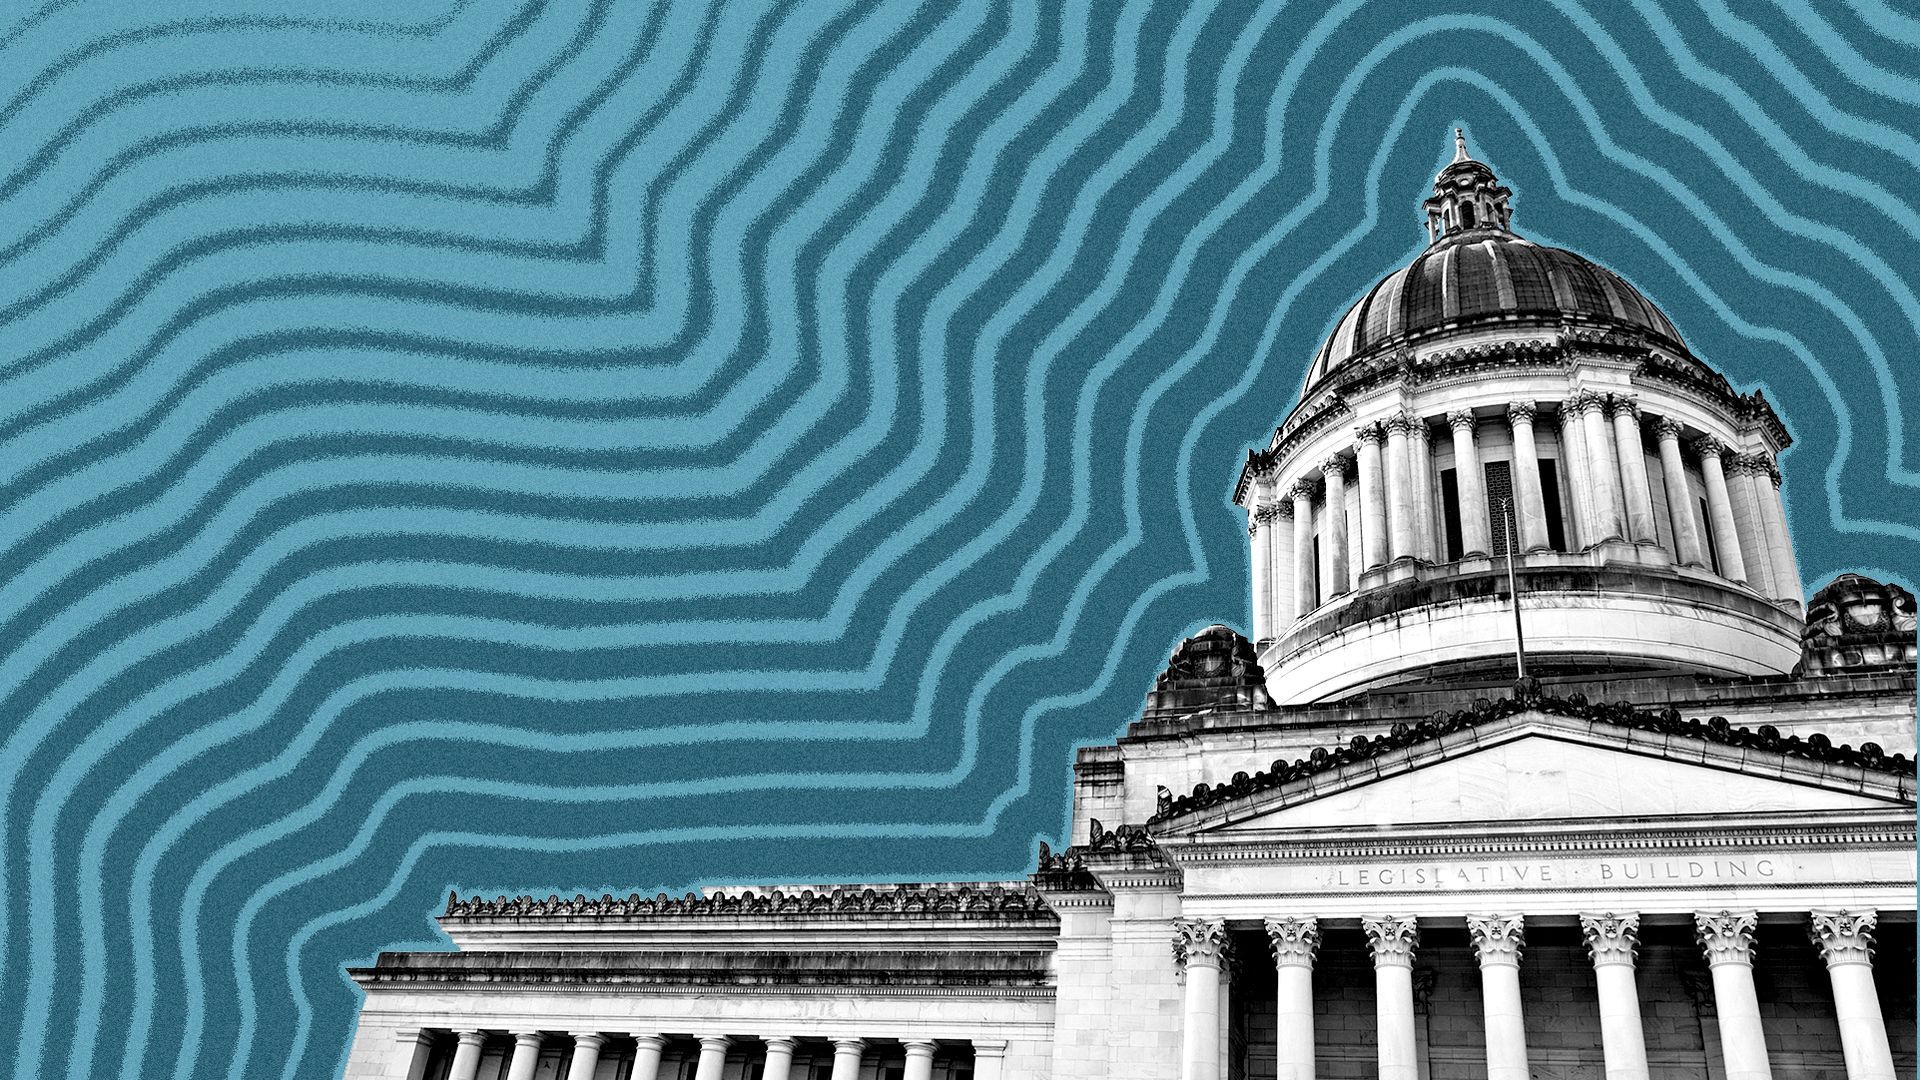 Illustration of the Washington State Capitol with lines radiating from it.